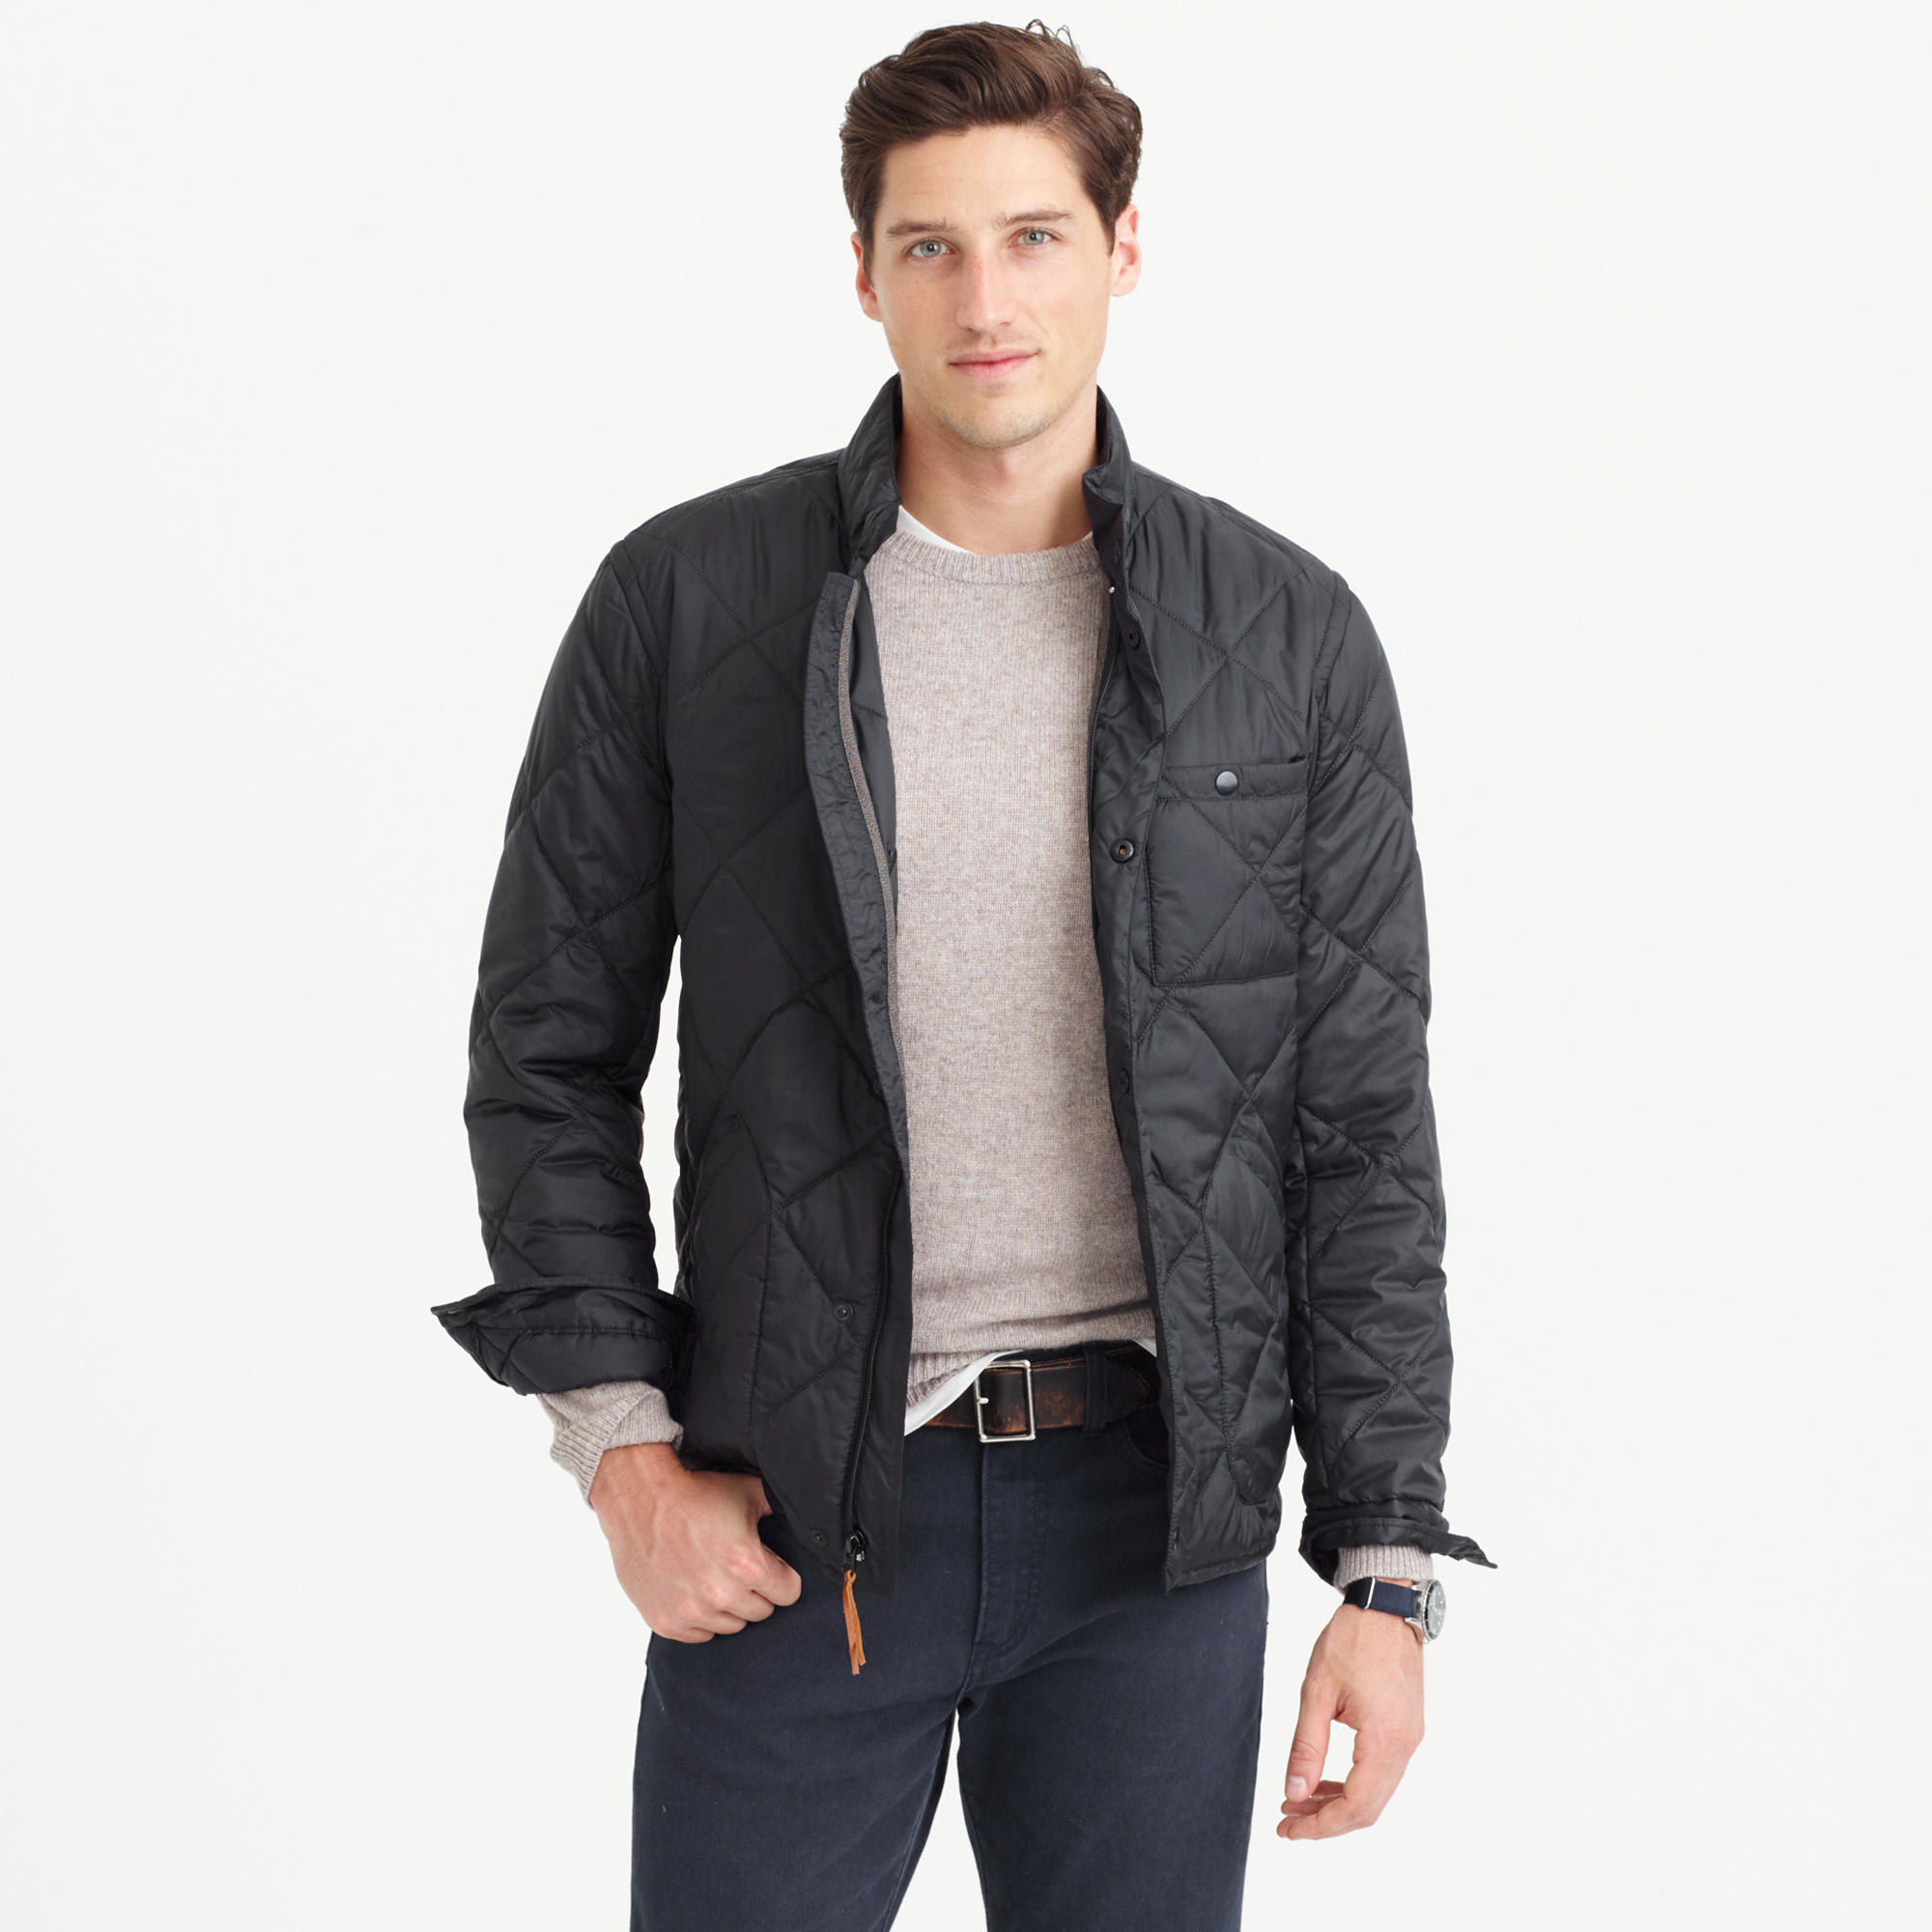 Lyst - J.Crew Nylon Sussex Quilted Jacket in Black for Men